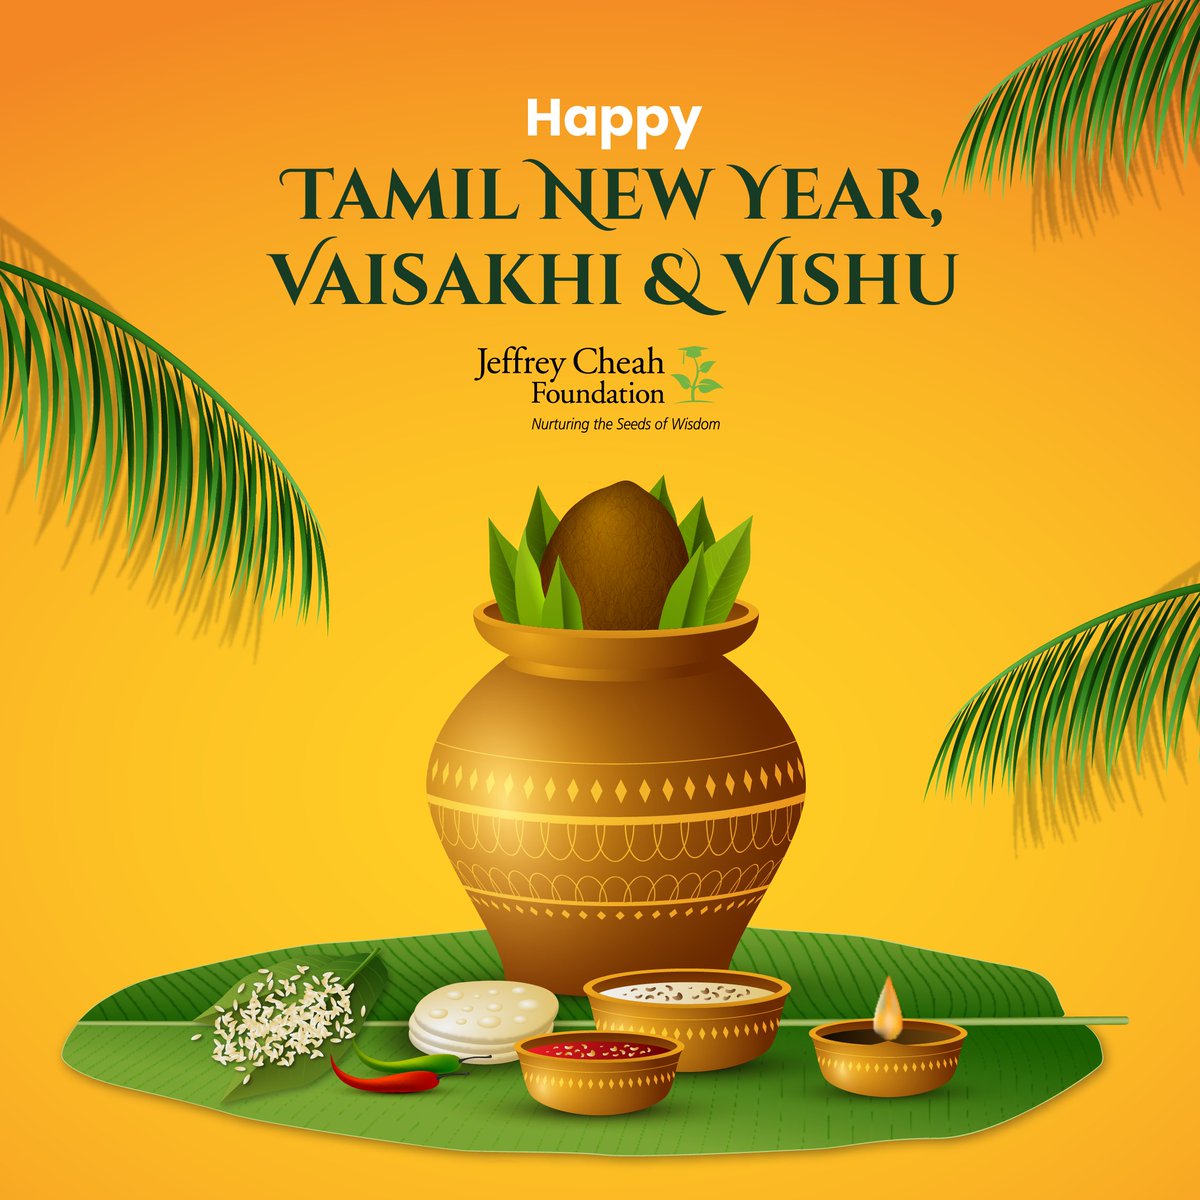 Wishing all celebrating a happy Tamil New Year, Vaisakhi, and Vishu! May this auspicious day lead all into a prosperous year and a brighter future. 🥥🪔 #TamilNewYear #Vaisakhi #Vishu